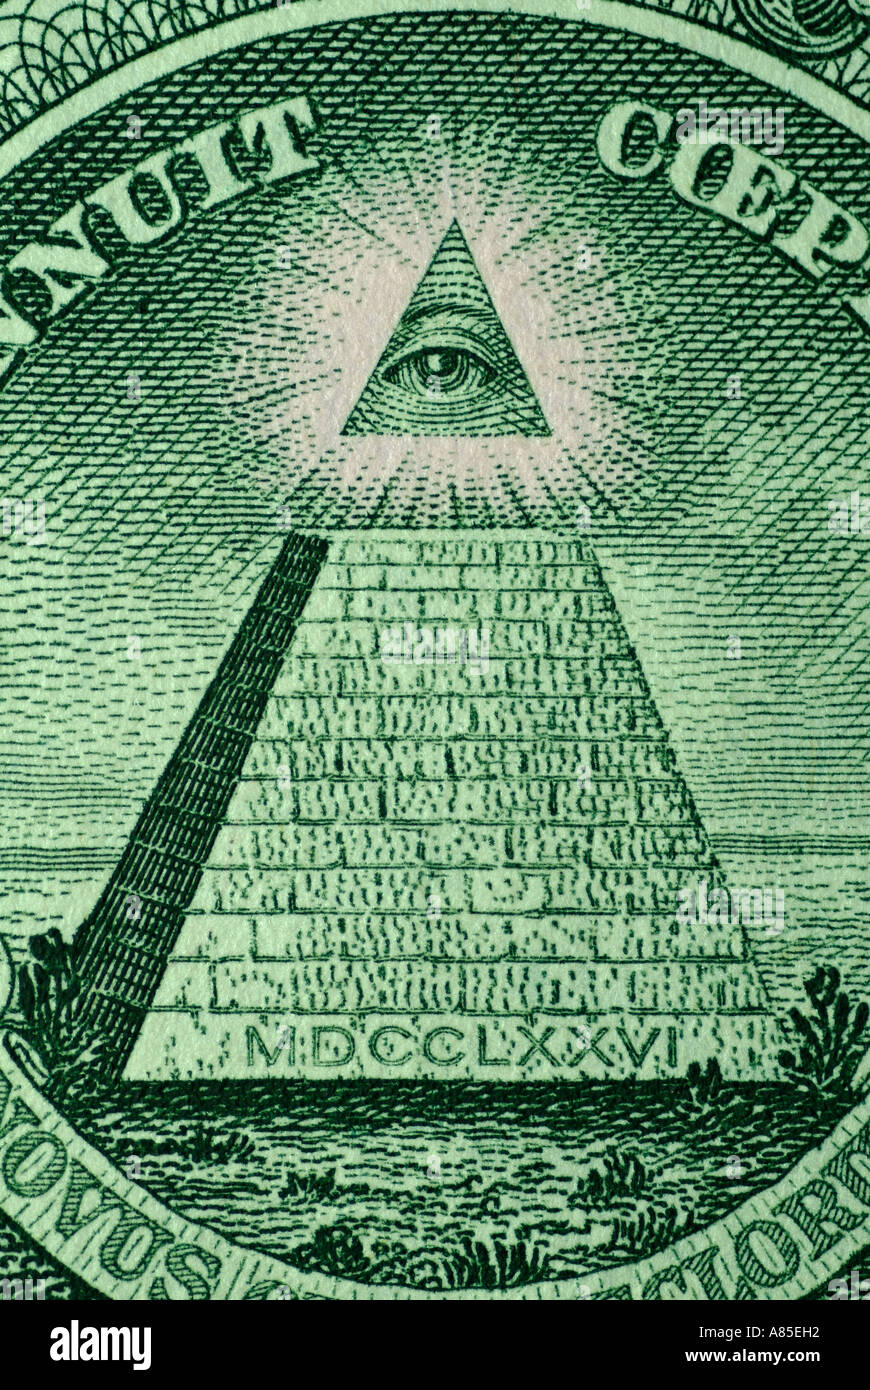 American US One Dollar Note Showing a Pyramid with 13 Steps and an Eye in the Apex, Close Up. Stock Photo